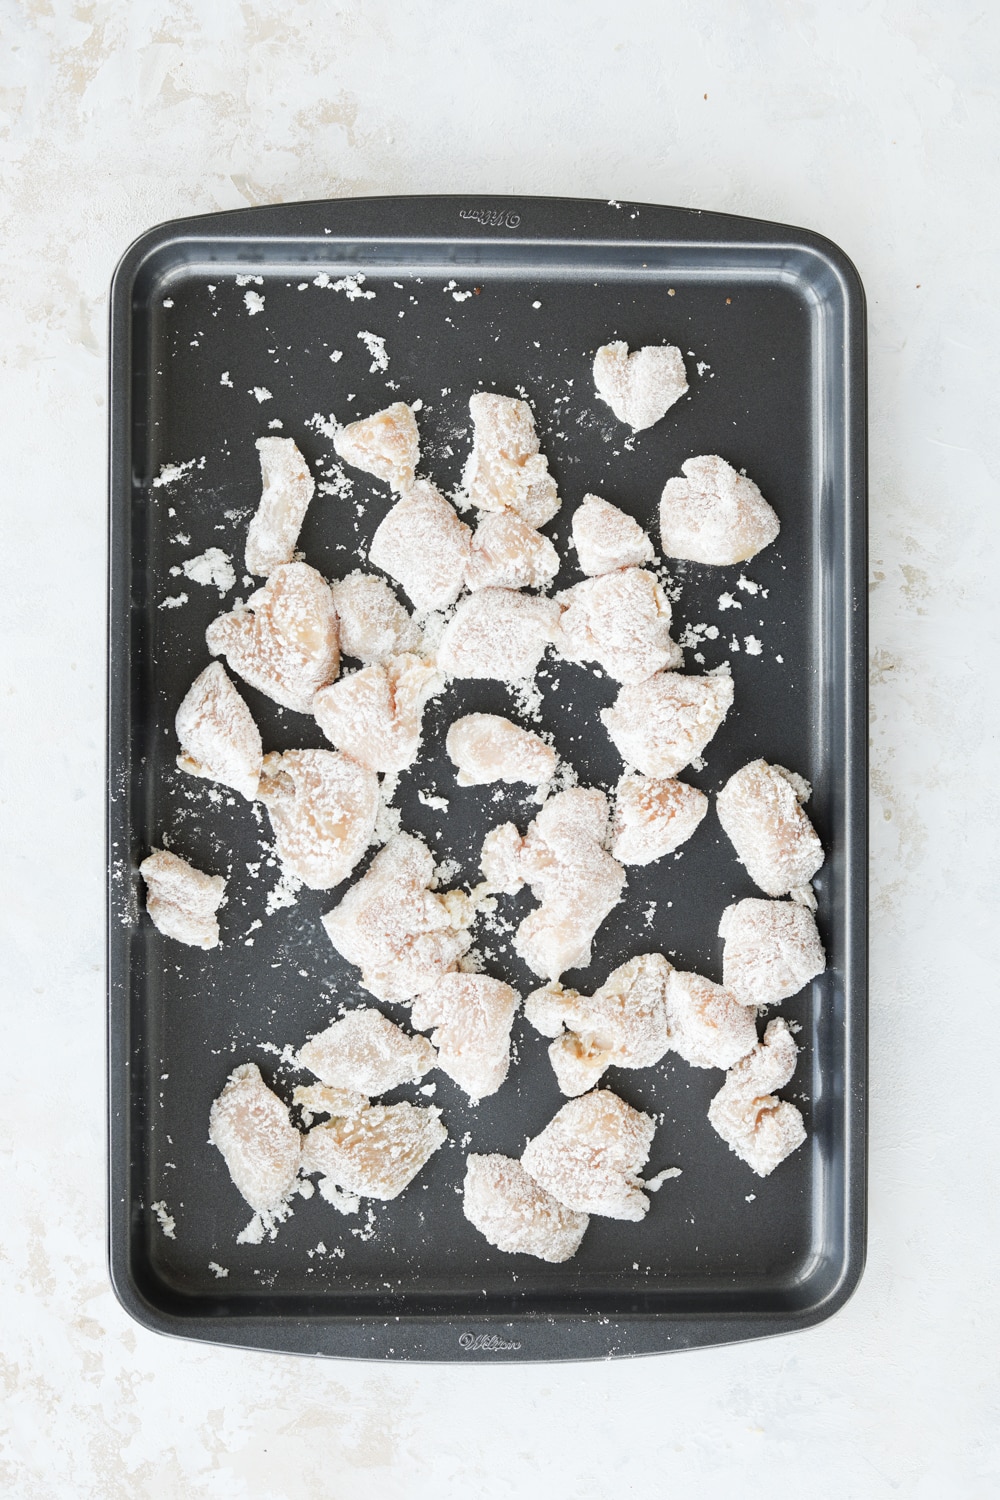 Pieces of cubed up chicken covered in unflavored protein powder on a gray baking sheet.